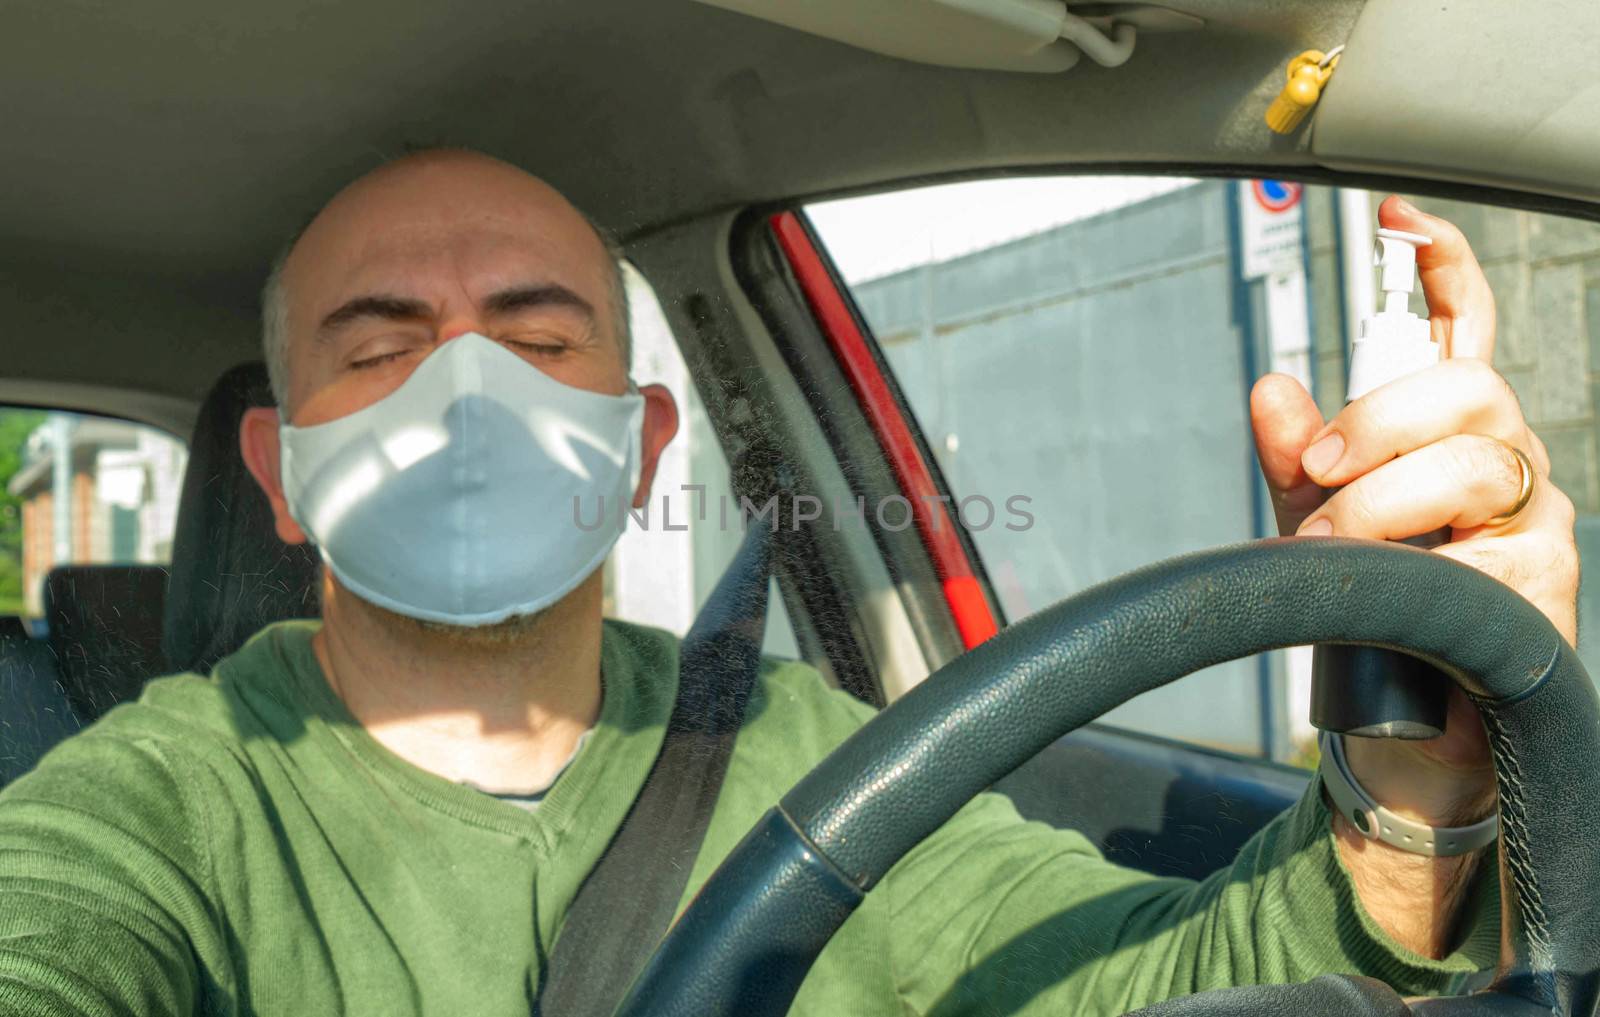 Turin, Piedmont, Italy. April 2020. Caucasian man driving the car wearing a mask. Spray the alcohol to disinfect the surfaces: the drops shine in the air. Accidentally they go into his eyes.